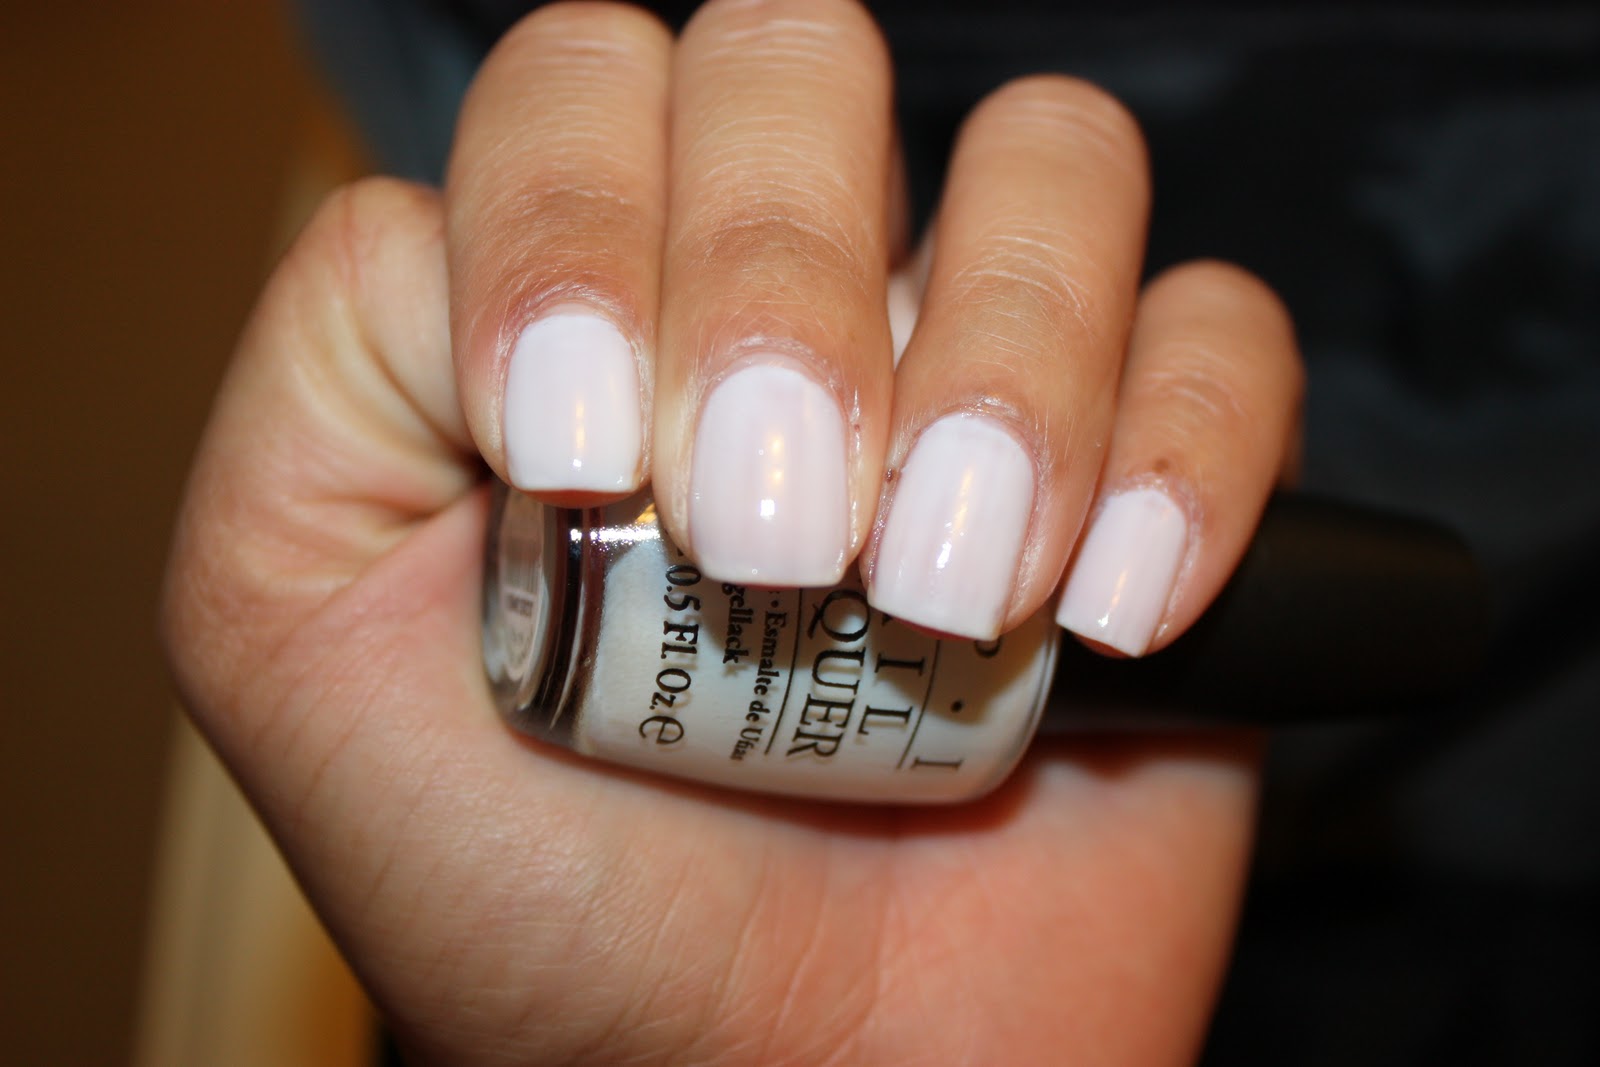 6. OPI GelColor in "Funny Bunny" - wide 2